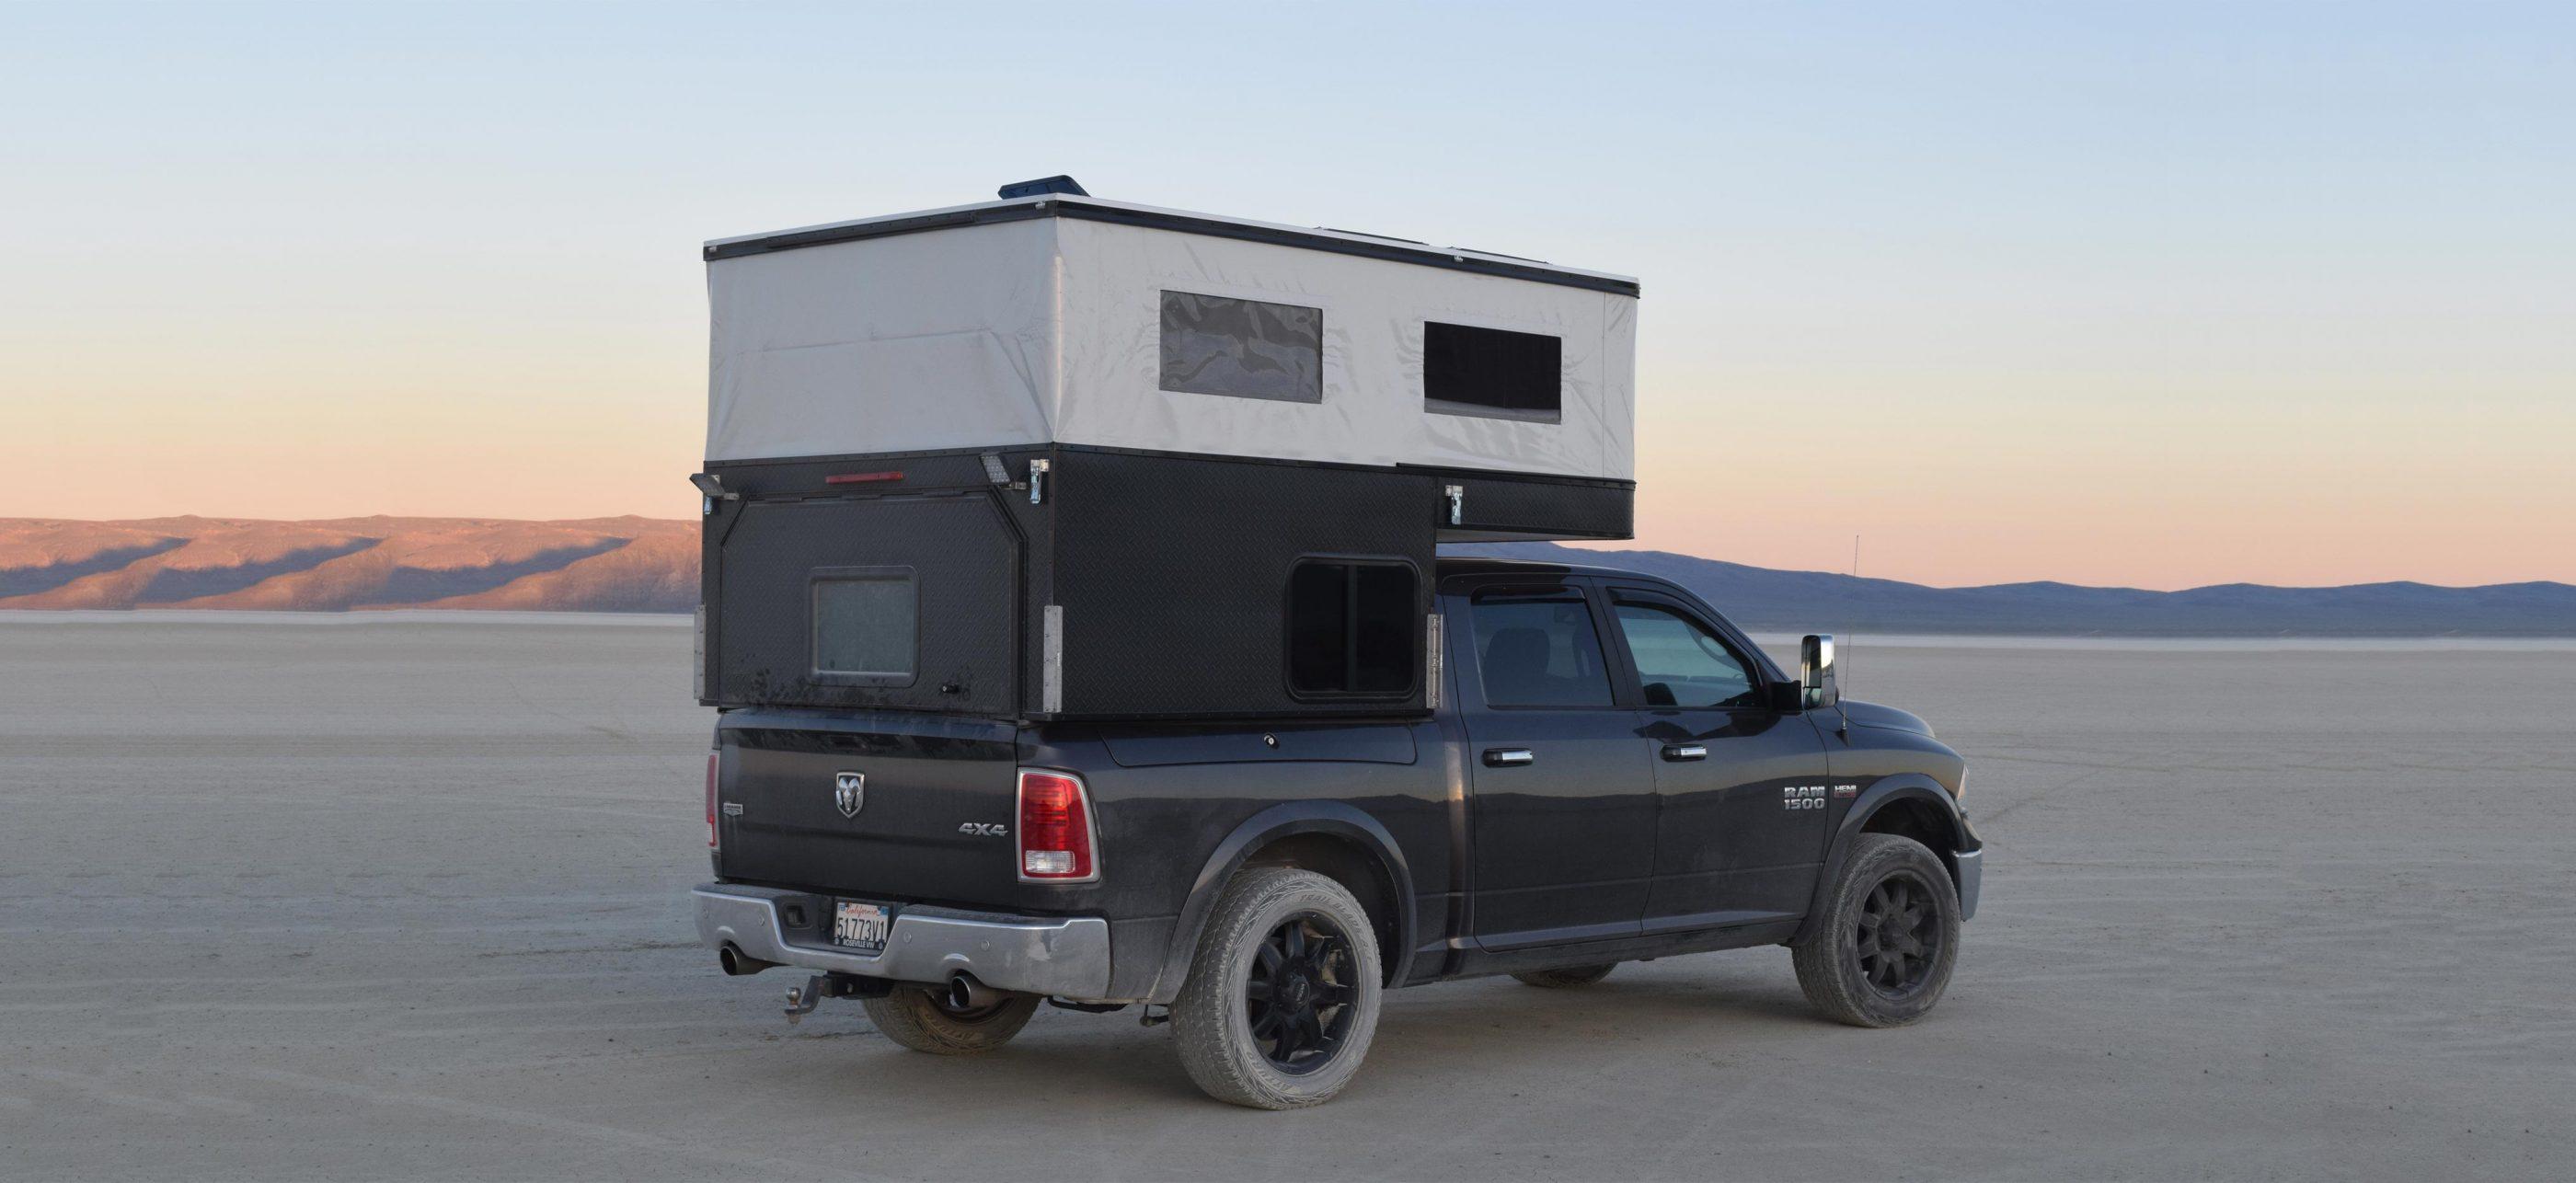 Project M | Four Wheel Campers All Terrain Campers Vs Four Wheel Campers